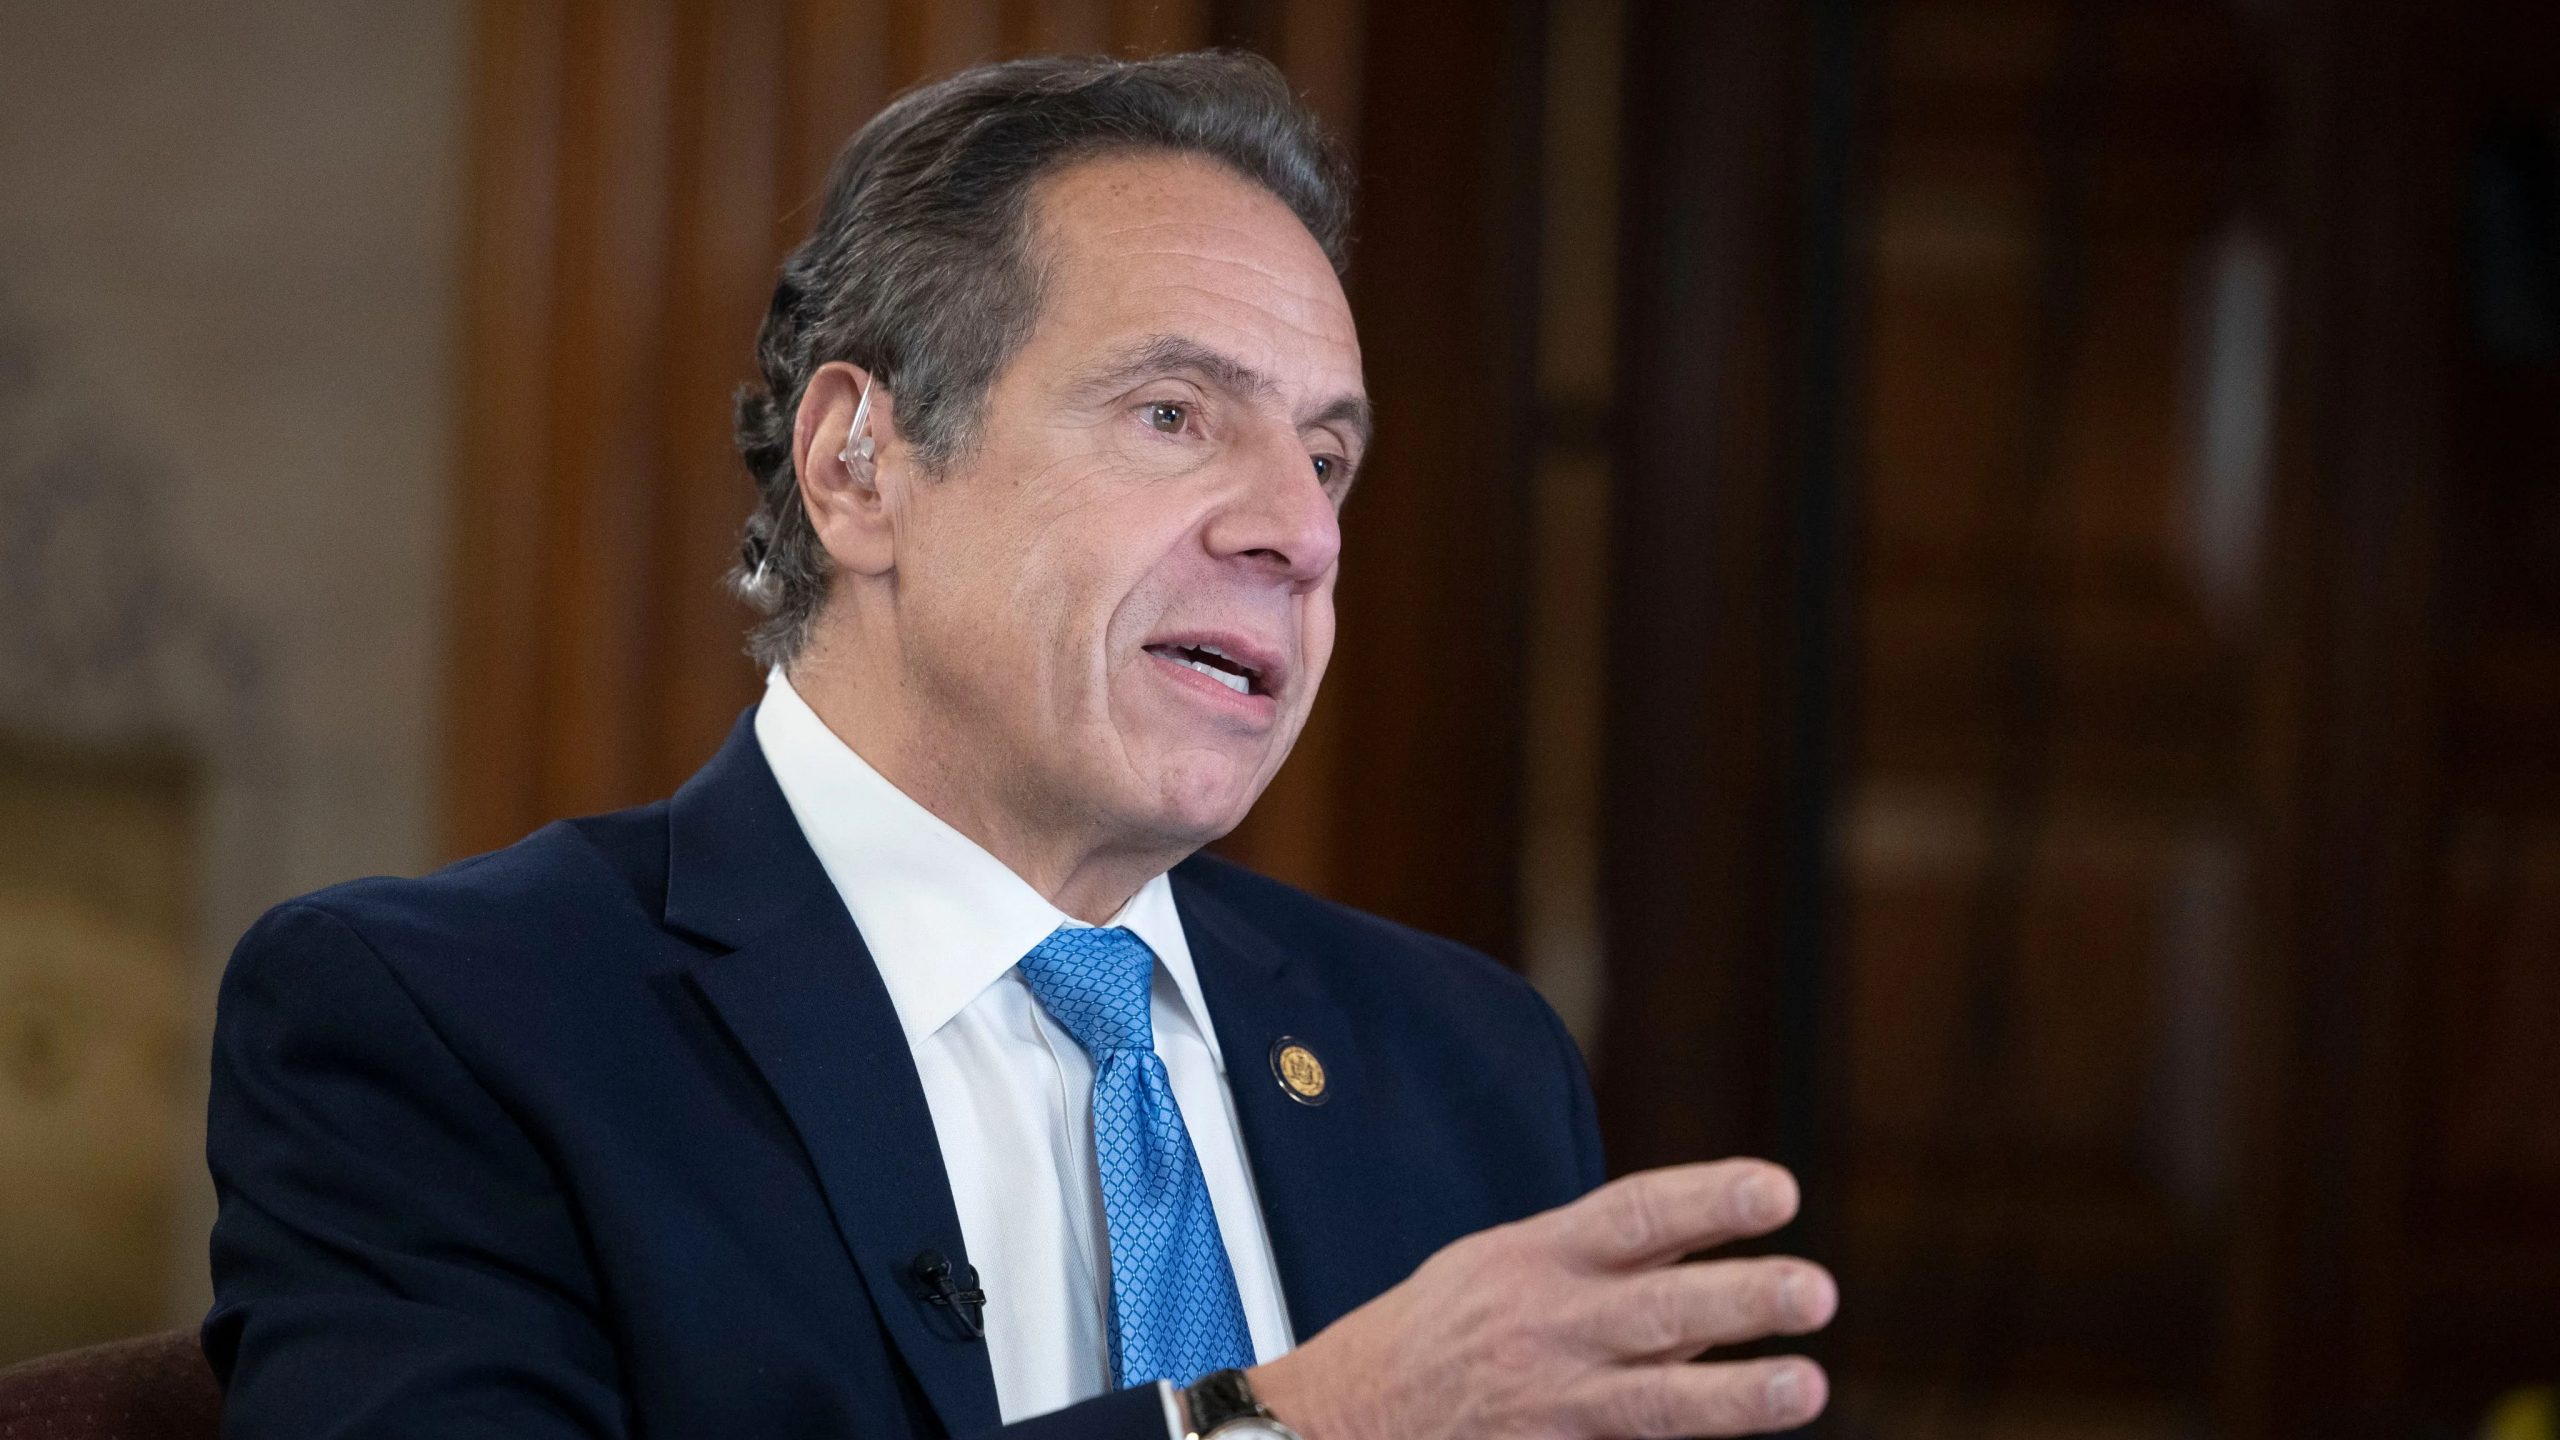 Governor Cuomo requests New York Attorney General to pick lawyer for sexual harassment case review